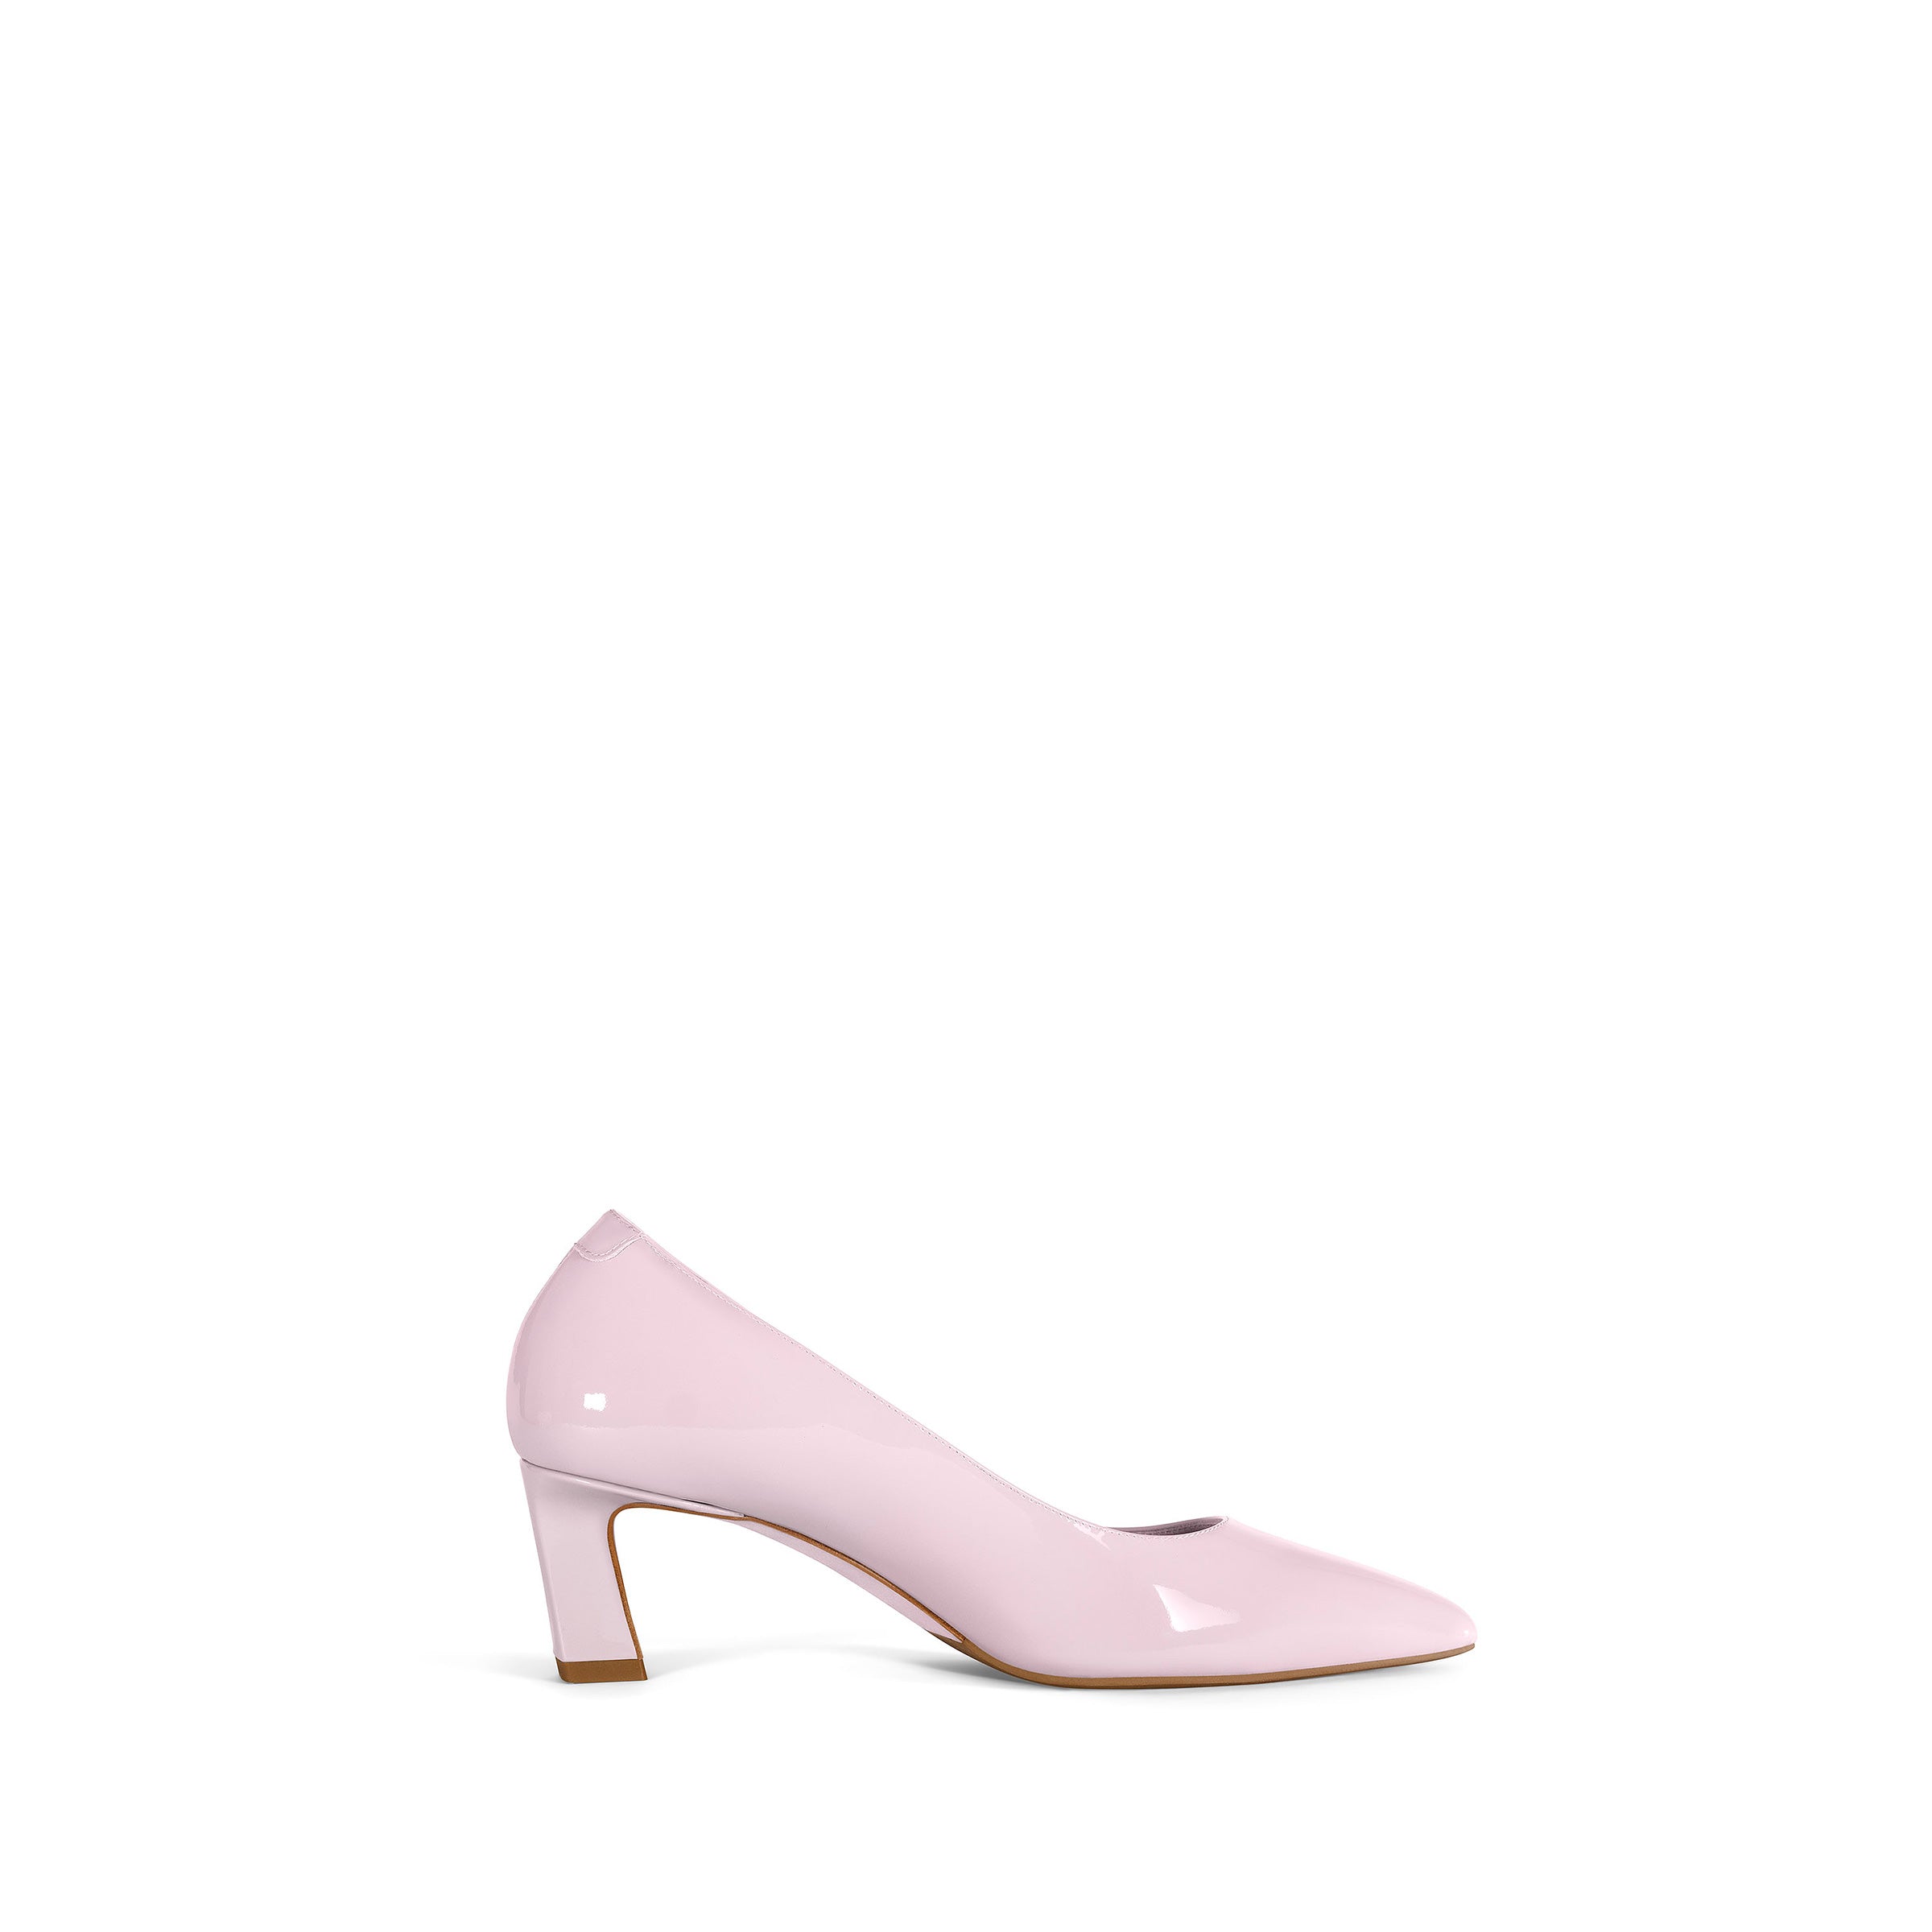 Amore 55 Pump / SC Blush Nude Patent Leather